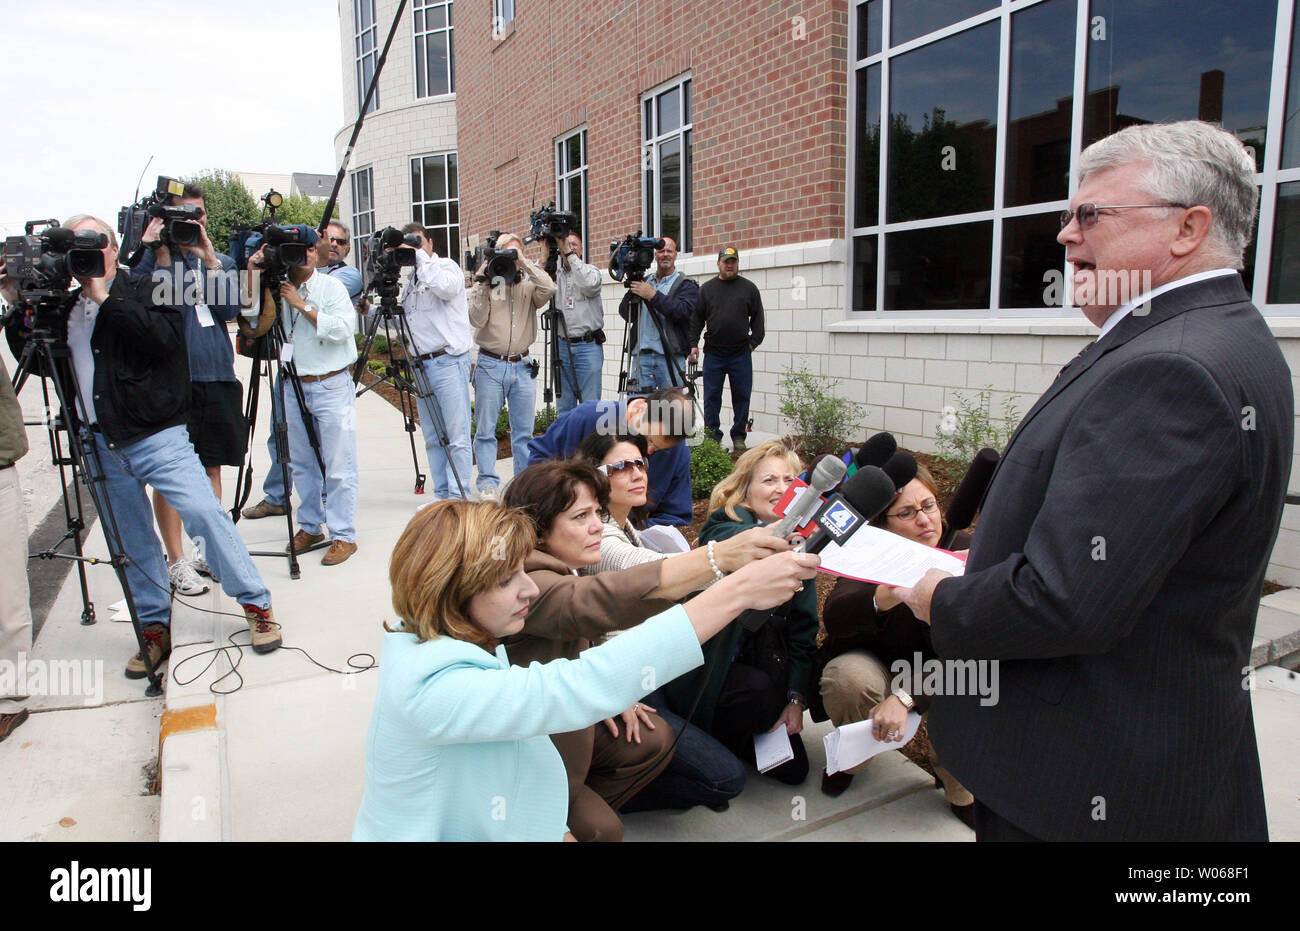 Procecuting attorney Robert Parks talks to reporters about Shannon Torrez, the women who allegedly kidnapped a week old baby and slashed the throat of the mother after the woman was arraigned in the Franklin County Courthouse in Union, Missouri on September 21, 2006. Torrez has been charged with the kidnapping of 12-day-old baby Abby Woods that occured on September 15 in nearby Londell, Missouri. On September 15, the mother, Stephanie Ochsenbine, 21, called police and said a women attacked her with a knife after entering her home to use the telephone. The attacker cut her throat and escaped wi Stock Photo